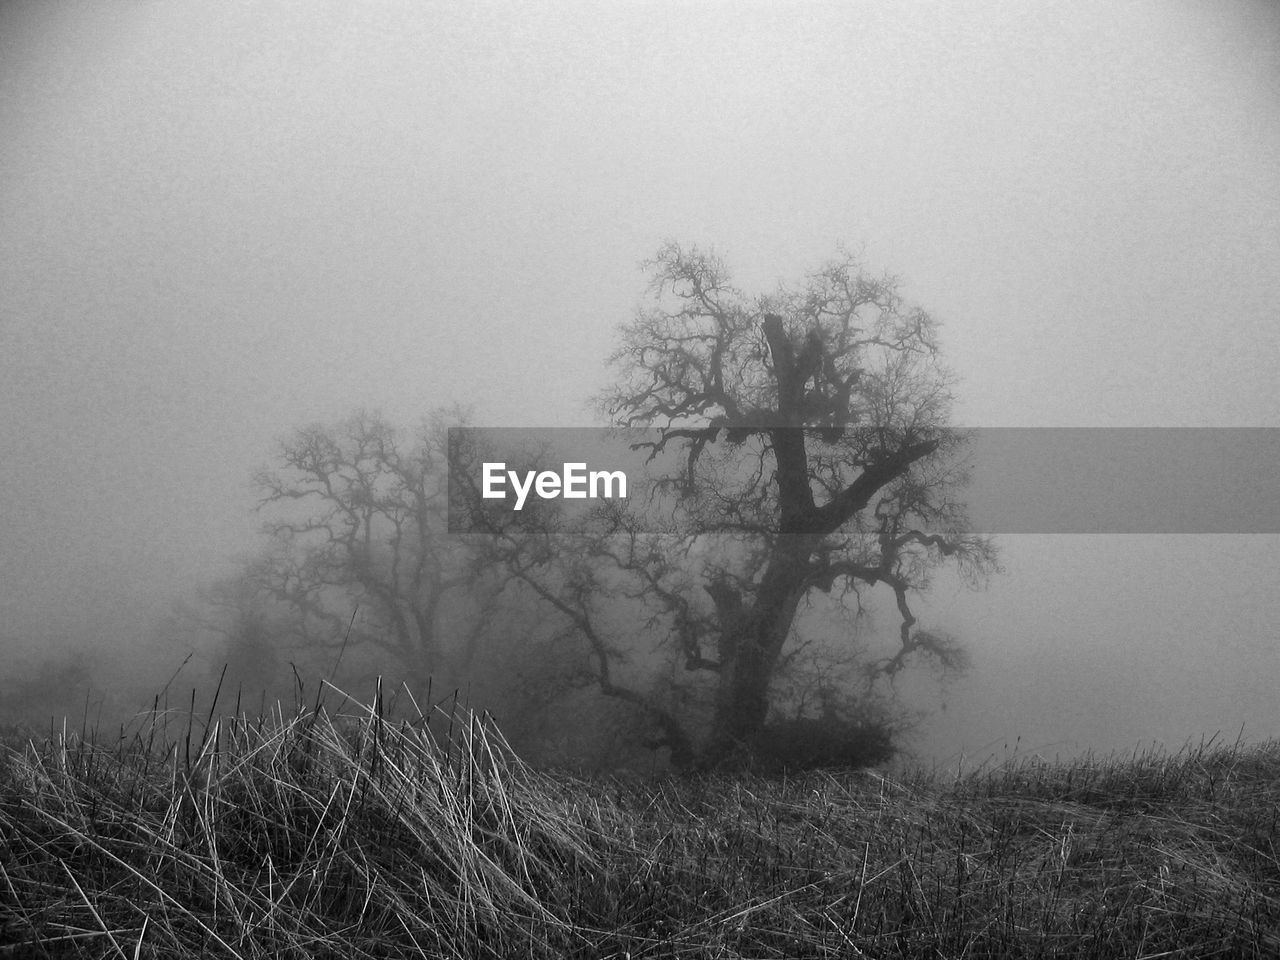 VIEW OF TREES IN FOGGY WEATHER